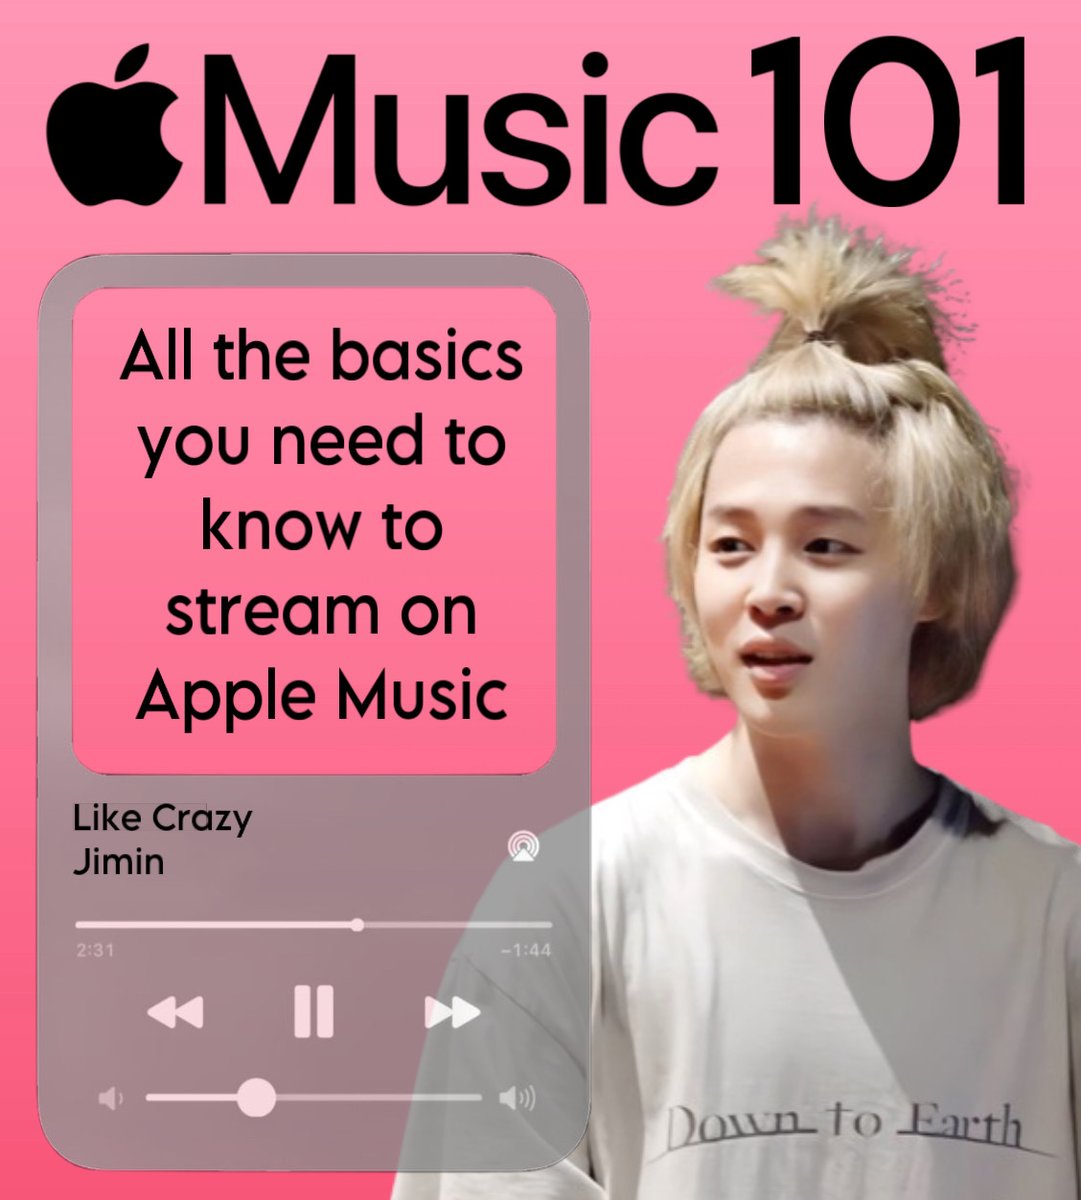 Let's prepare for FACE RE-COMEBACK and PJM2 💪 GET APPLE MUSIC FOR JIMIN NOW 🍎 All Jimin Lovers MUST learn and use multiple streaming platforms ‼️ Read through this thread Get your accounts ready! 🔥 KICKSTART 2024 WITH JIMIN STREAM ON ALL PLATFORMS #Kickstart2024withJimin